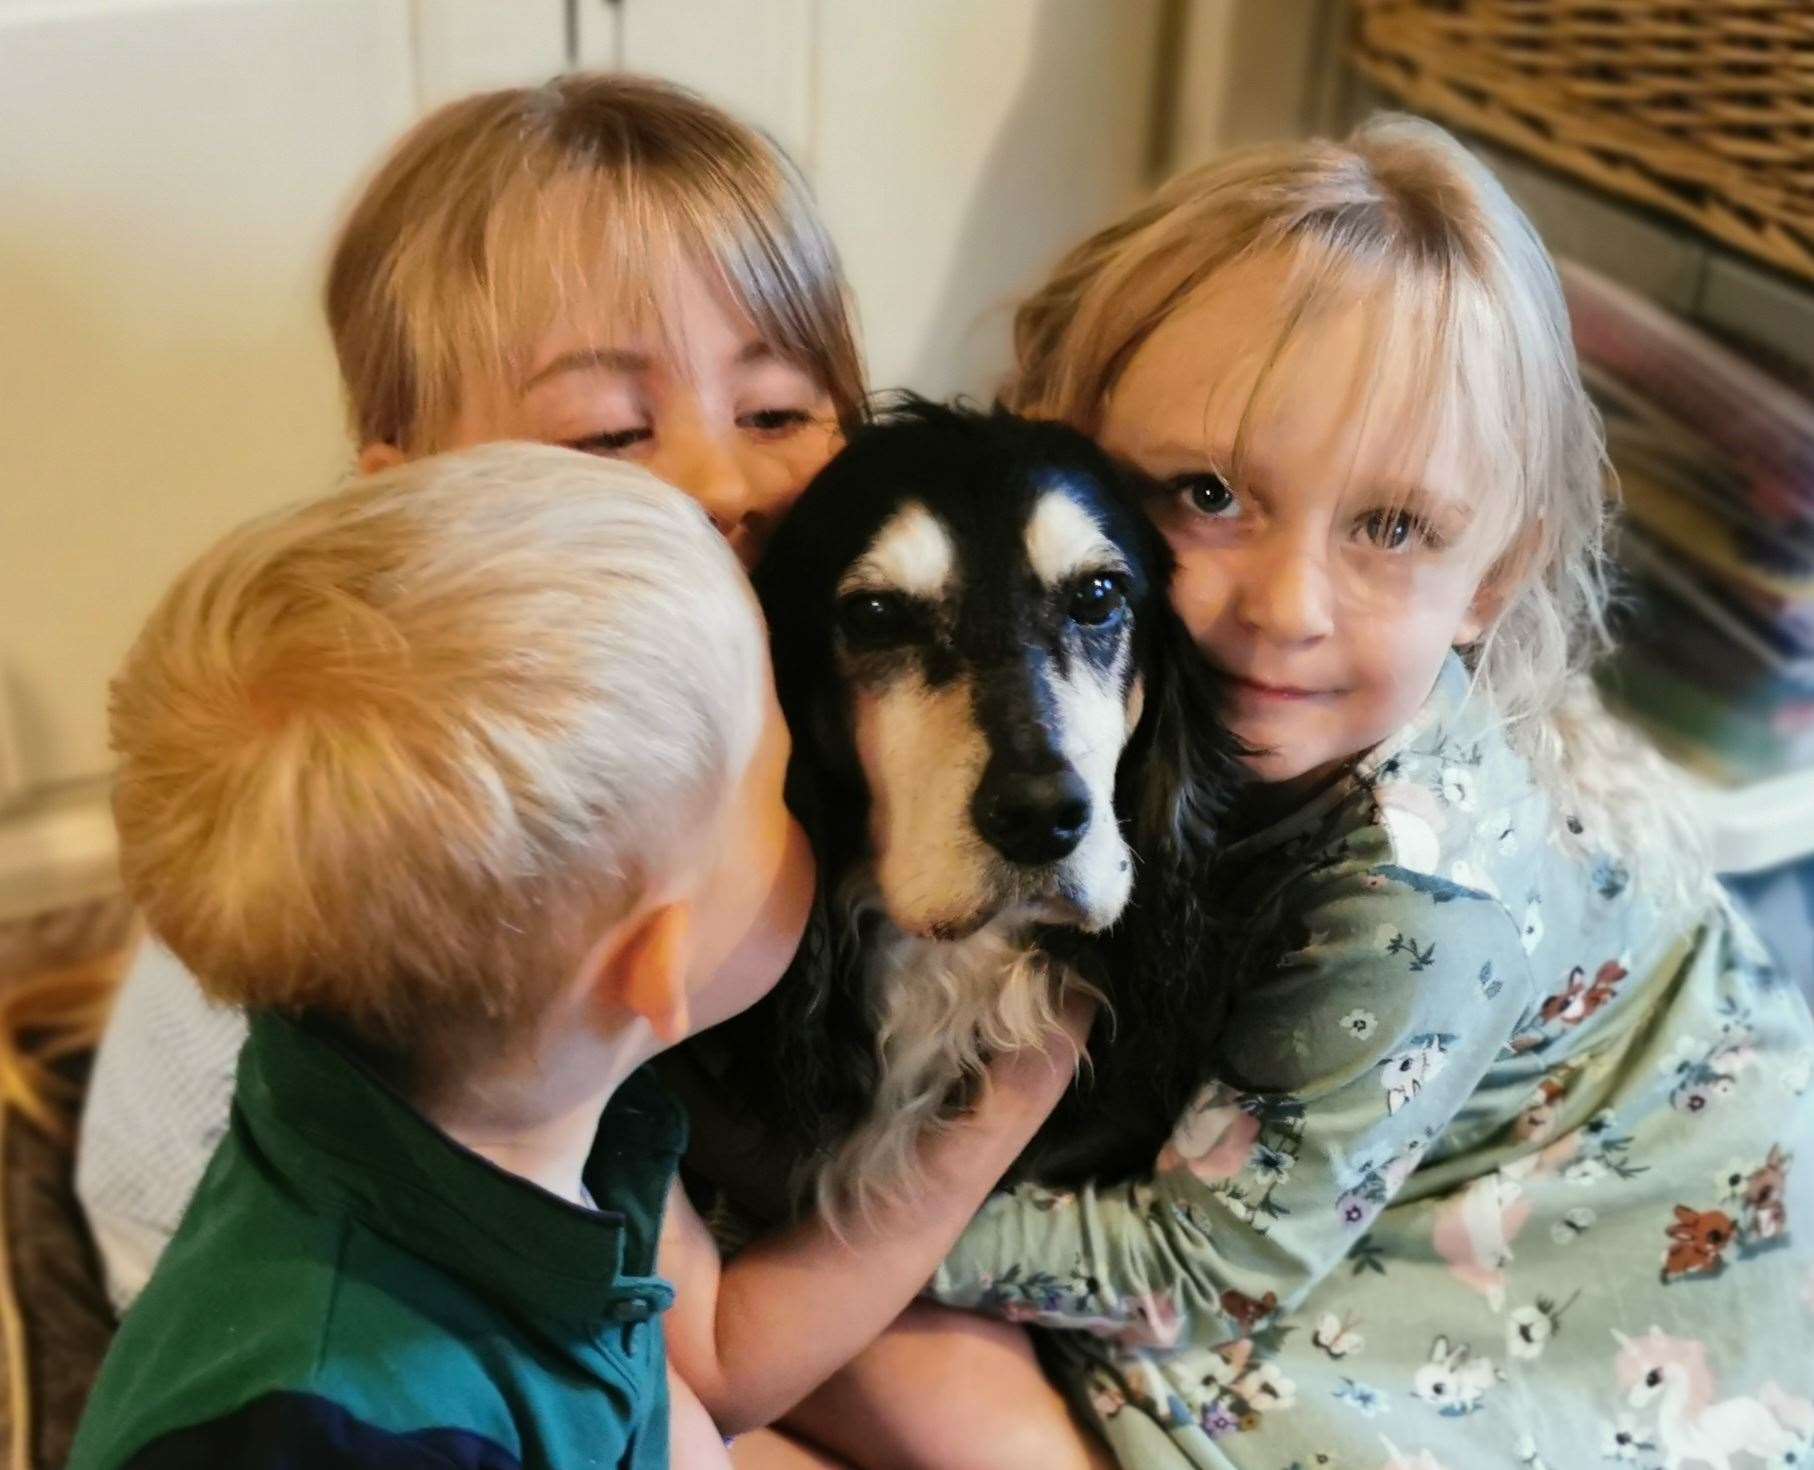 The family were ecstatic when cocker spaniel Lucy was returned